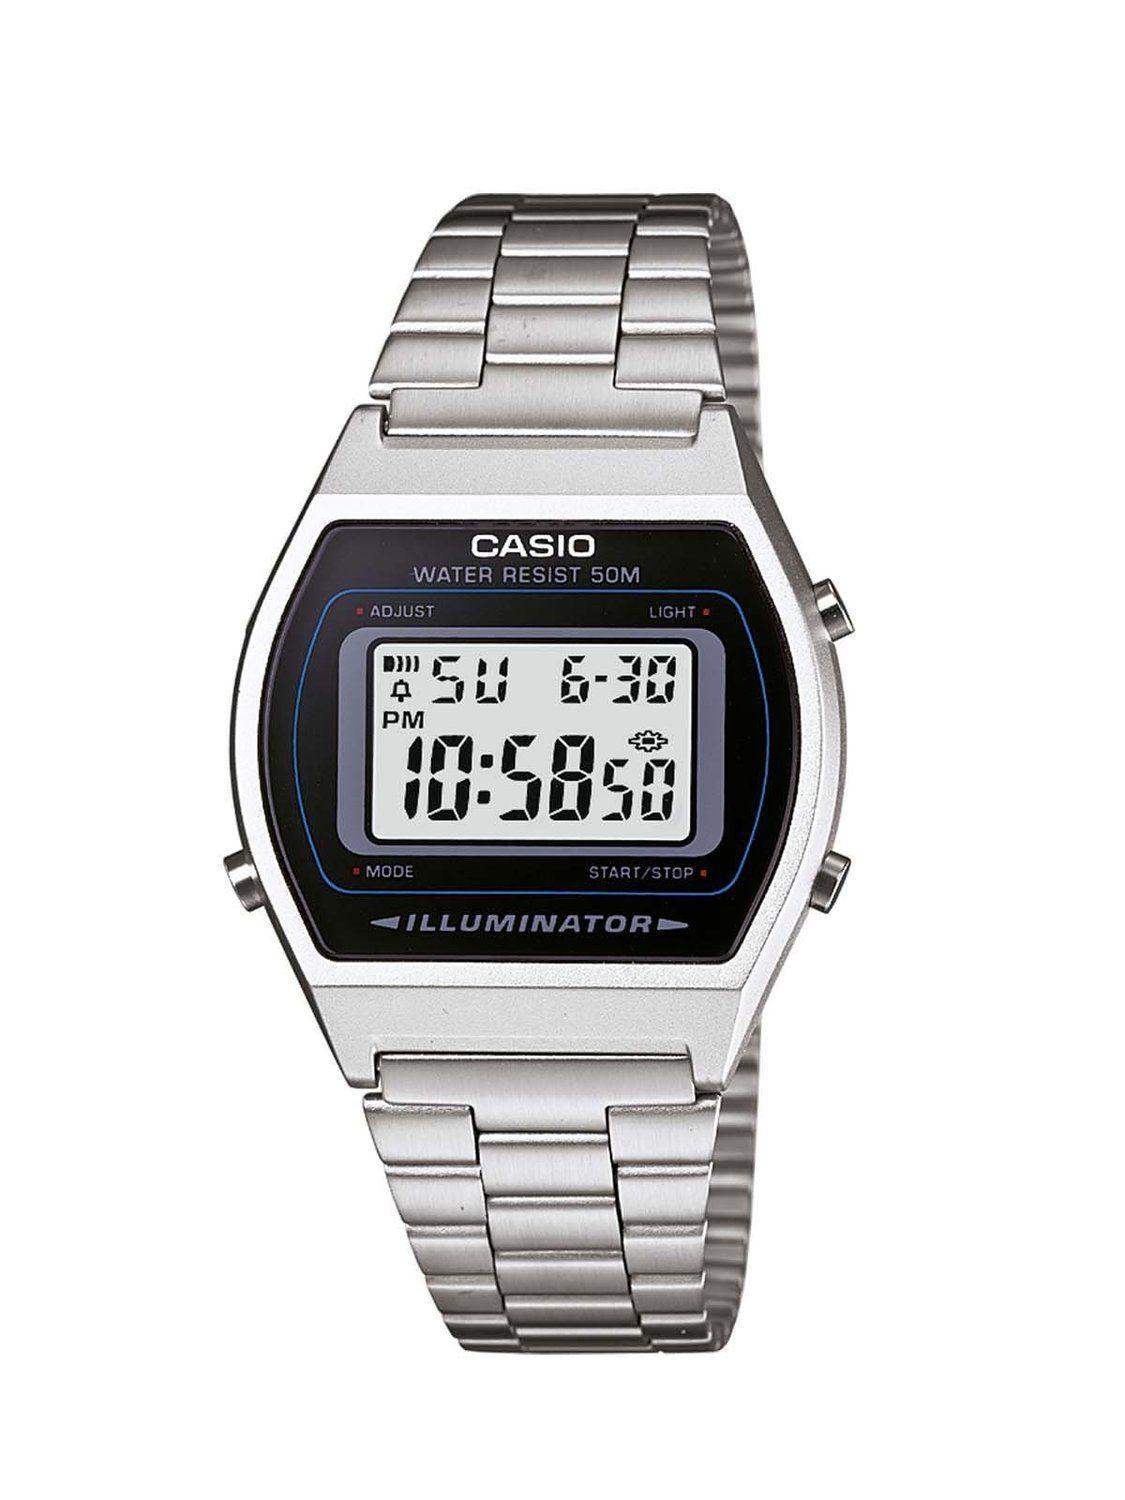 HD Casio Wallpaper and Photo. HD Products Wallpaper